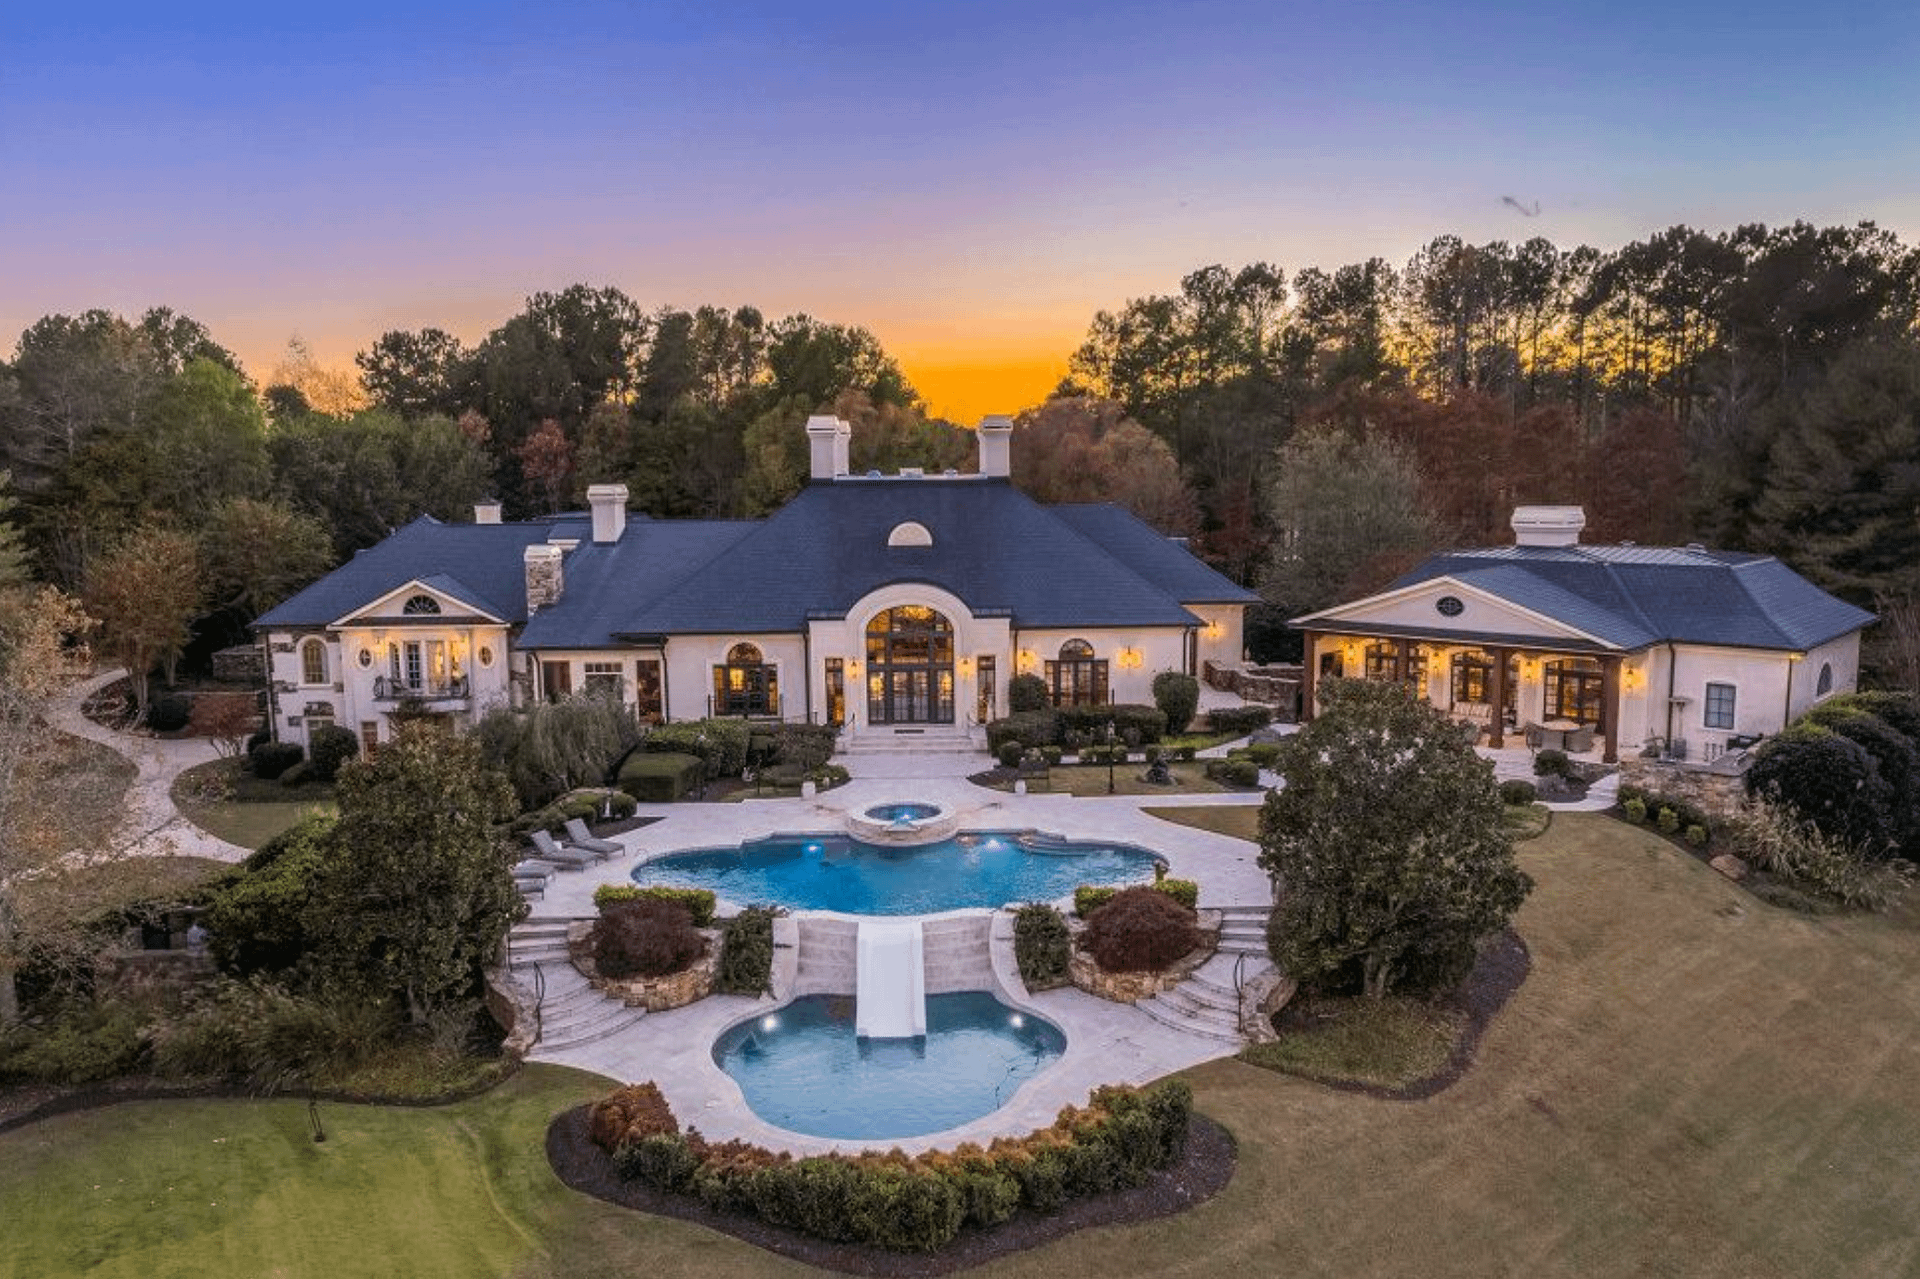 20,000 Square Foot Home In Ball Ground, Georgia (PHOTOS)